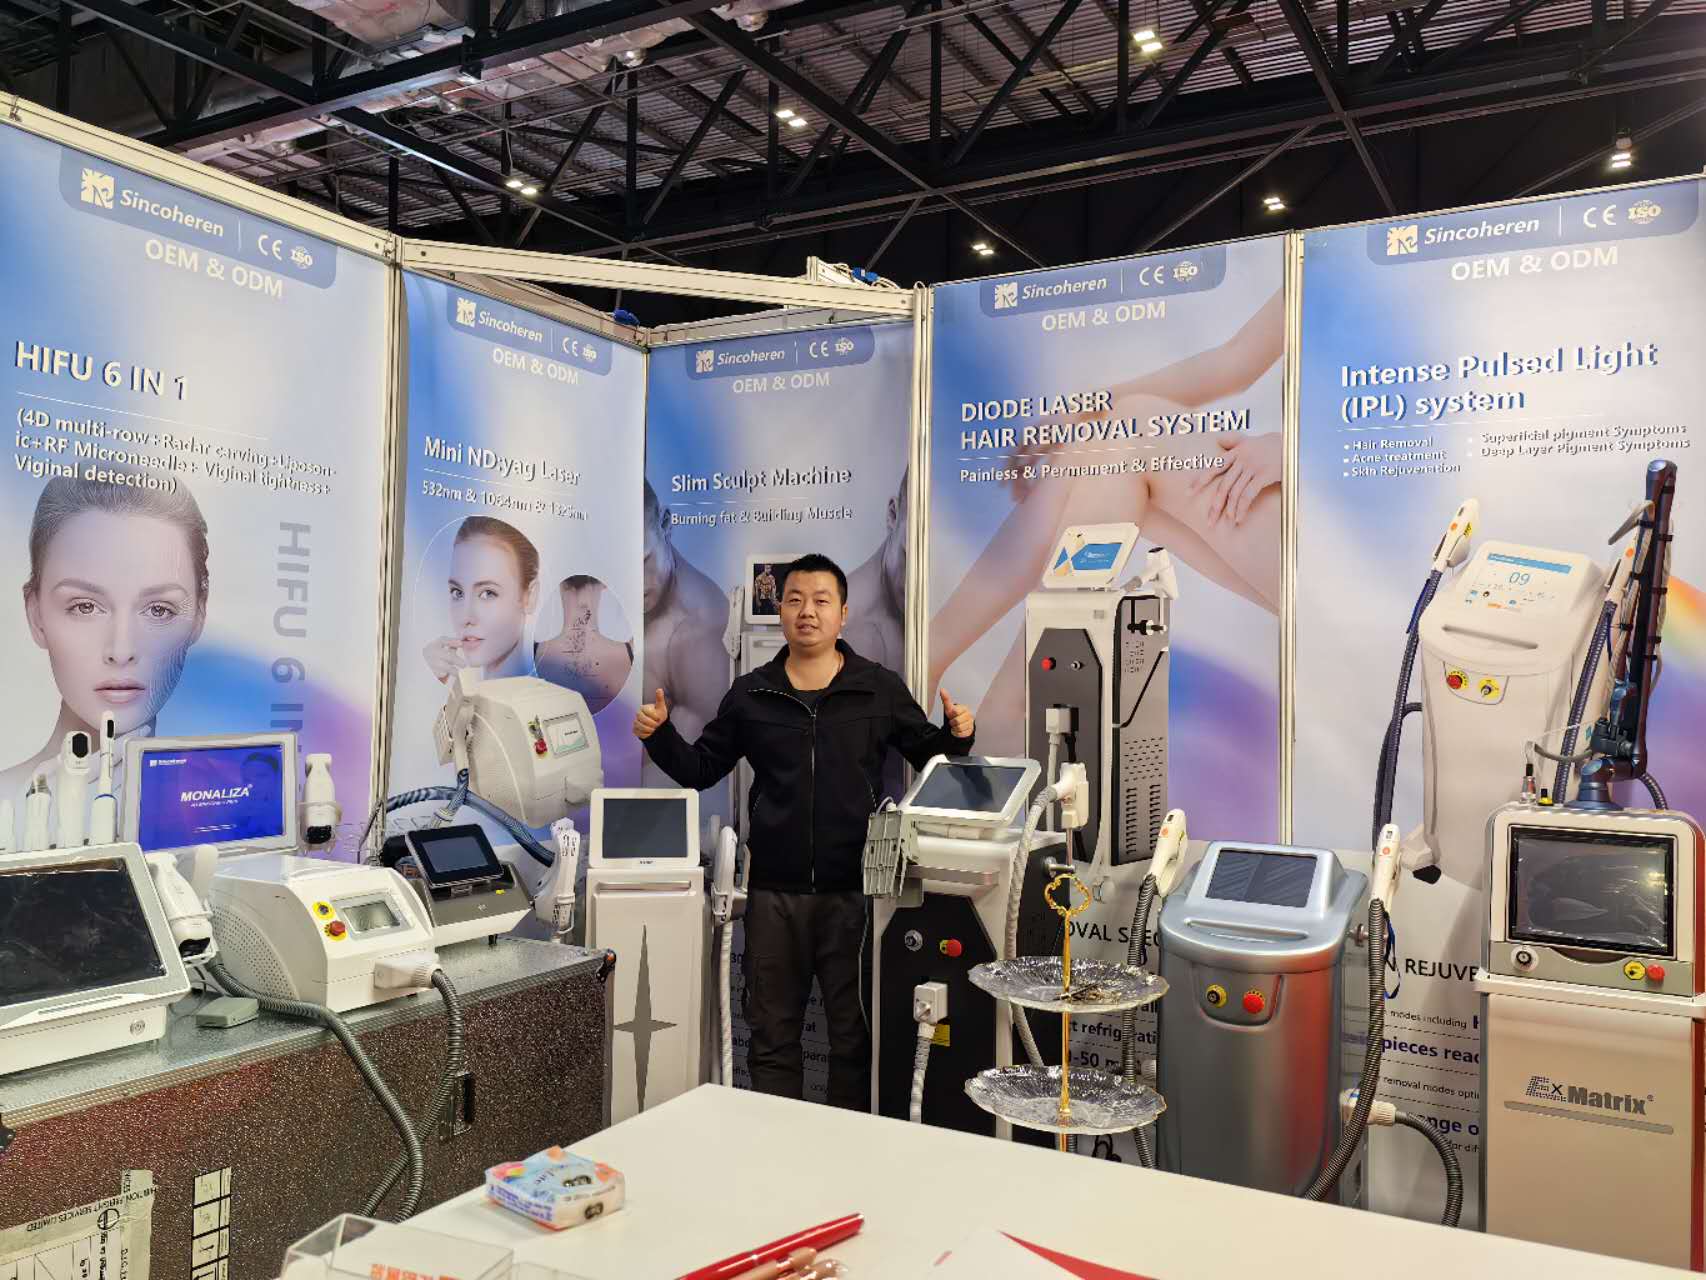 Sincoheren had participated in Beauty Equipment exhibition at Cosmoprof and Professional Beauty 2023.